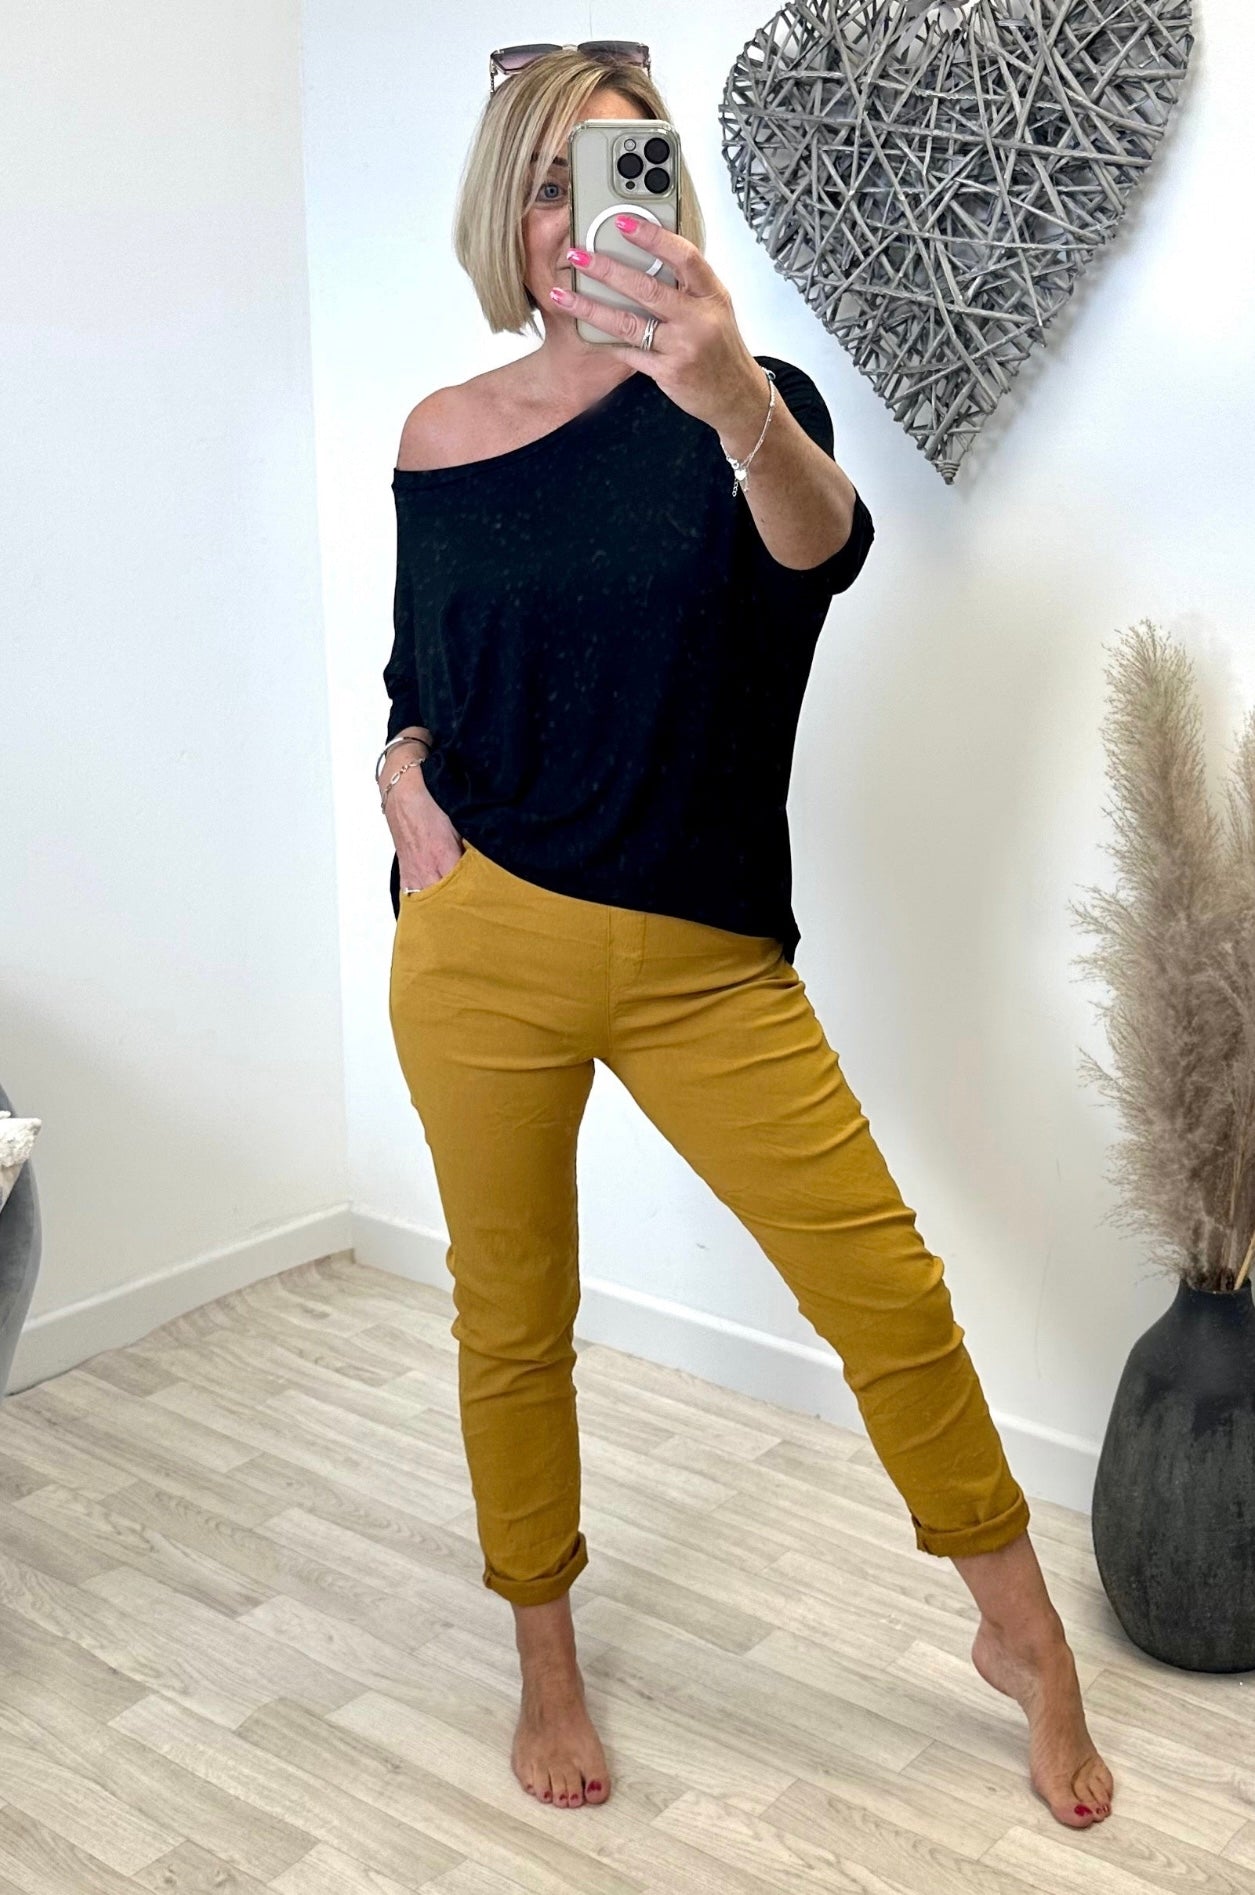 How to Wear Vibrant Mustard Pants - Economy of Style